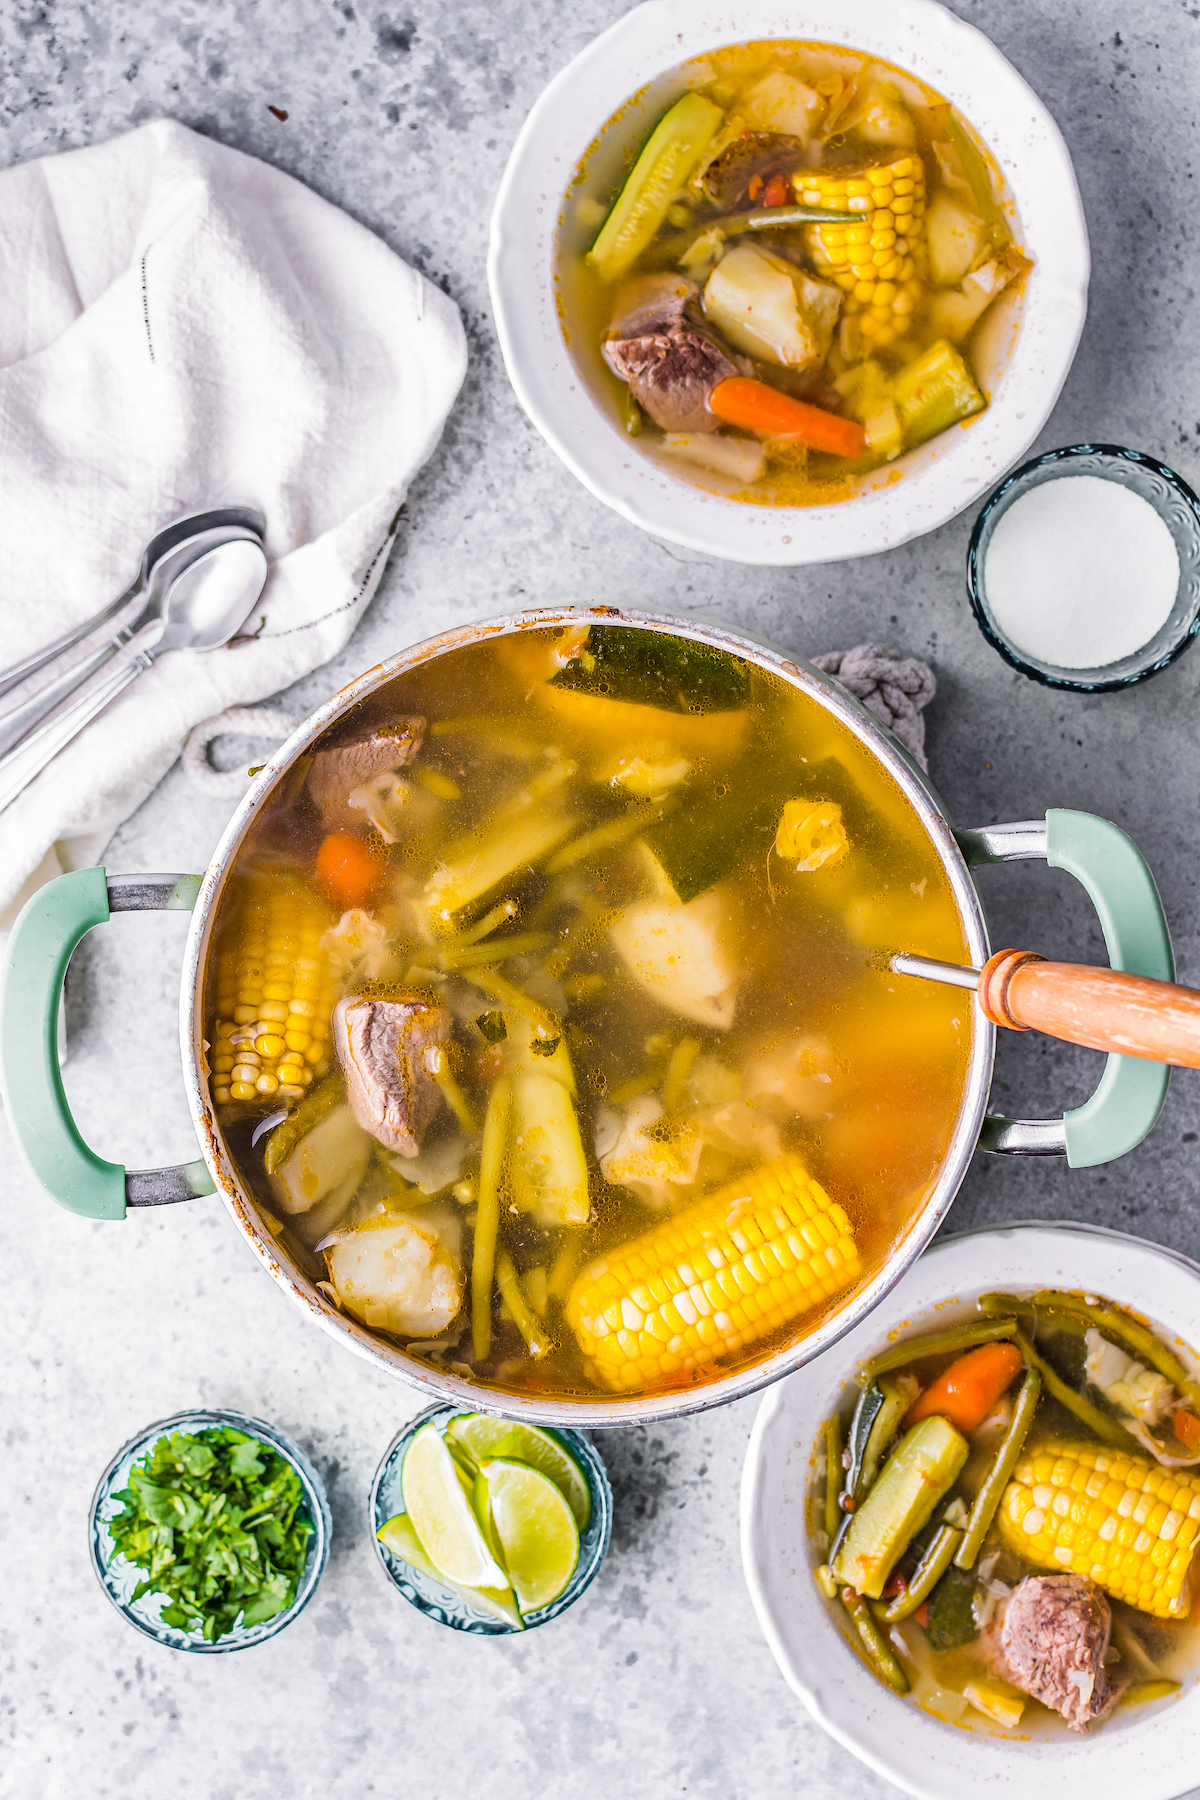 Simmering Caldo de Res, or beef soup, containing beef, corn on the cob, zucchini, and other vegetables